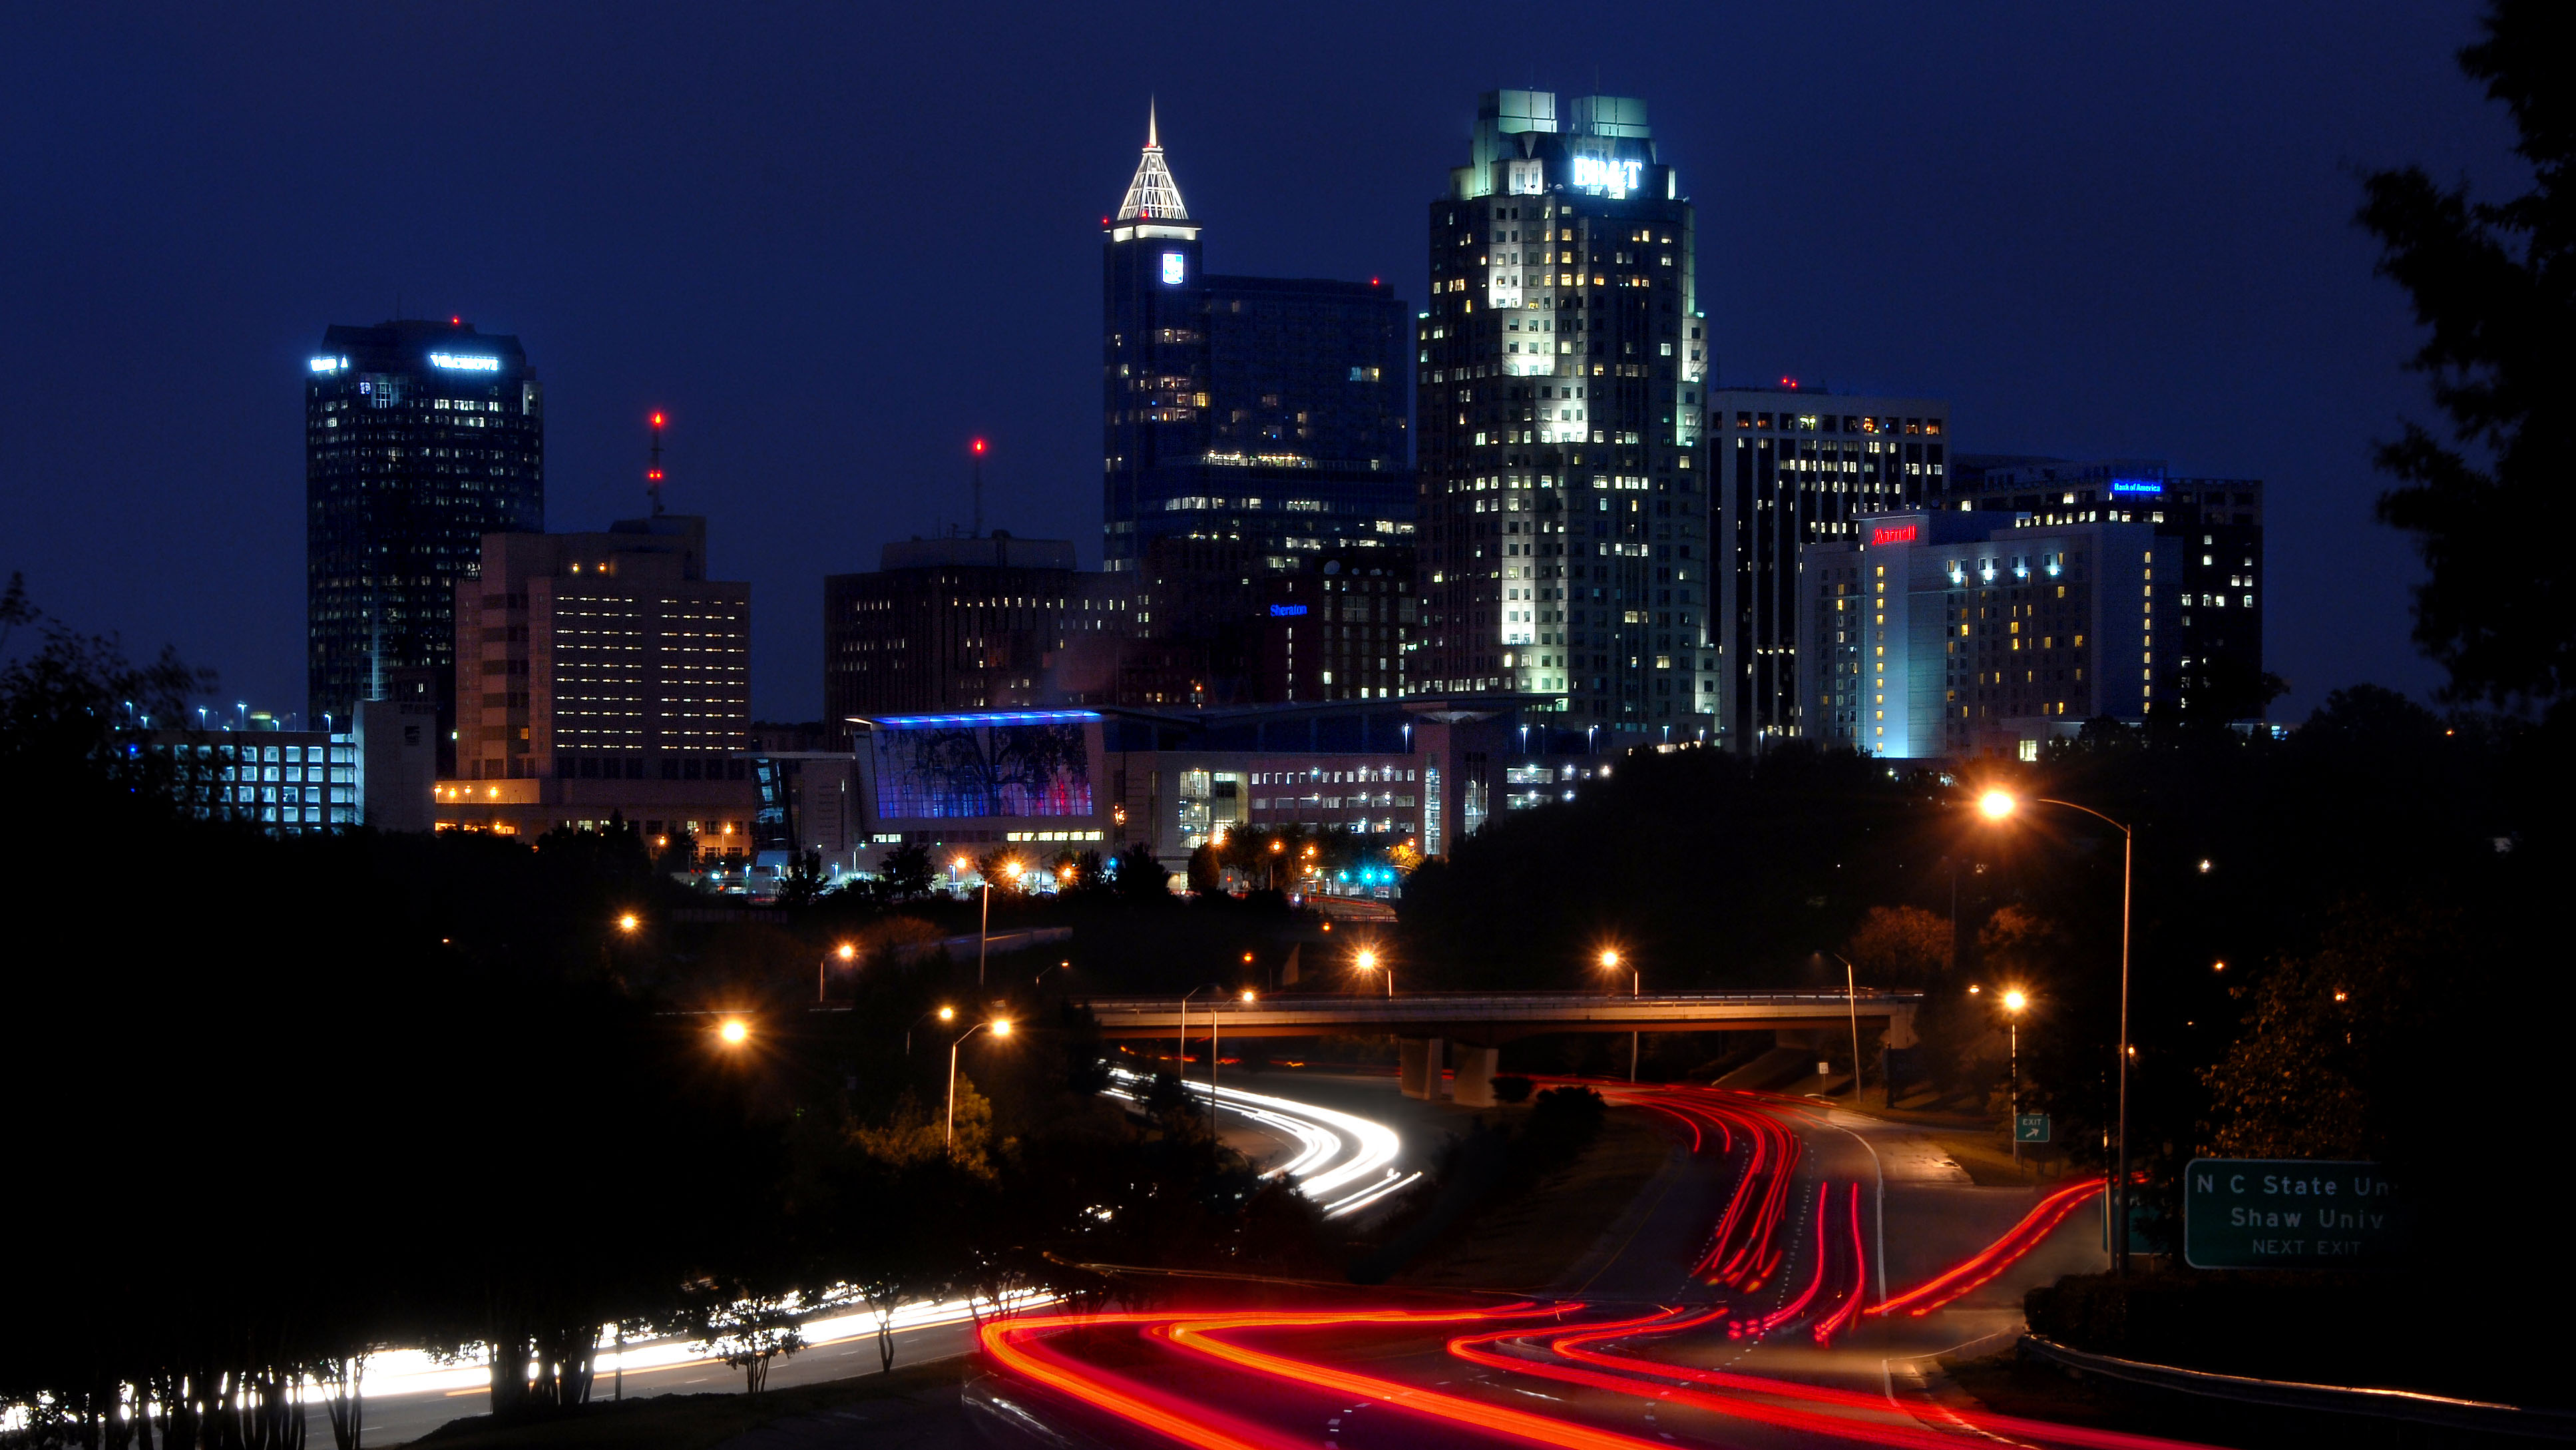 City of Raleigh skyline in the early evening. PHOTO BY ROGER WINSTEAD